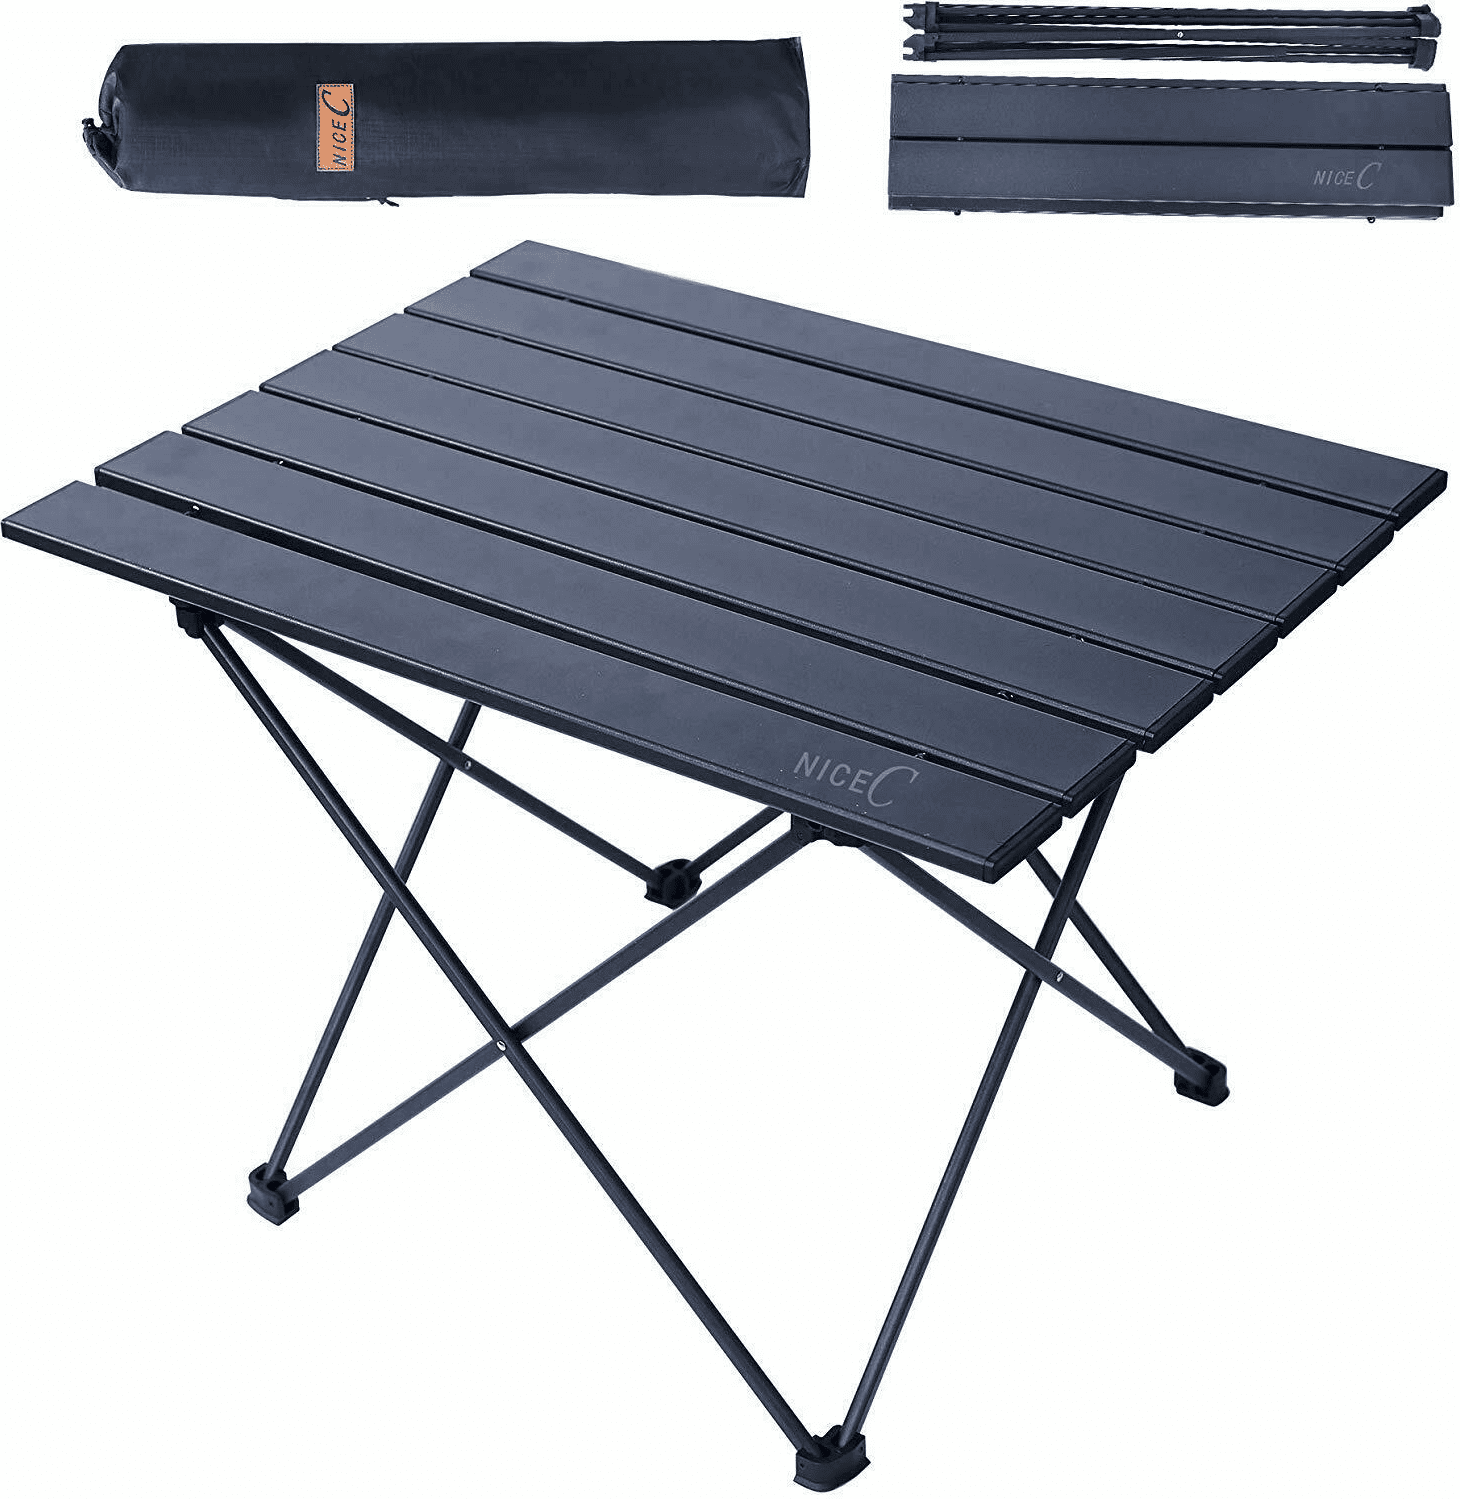 Aluminum Compact Desk for Camping Hiking Travel with Carry Bag Outdoor Folding Picnic Table SOVIGOUR Lightweight Portable Camping Table